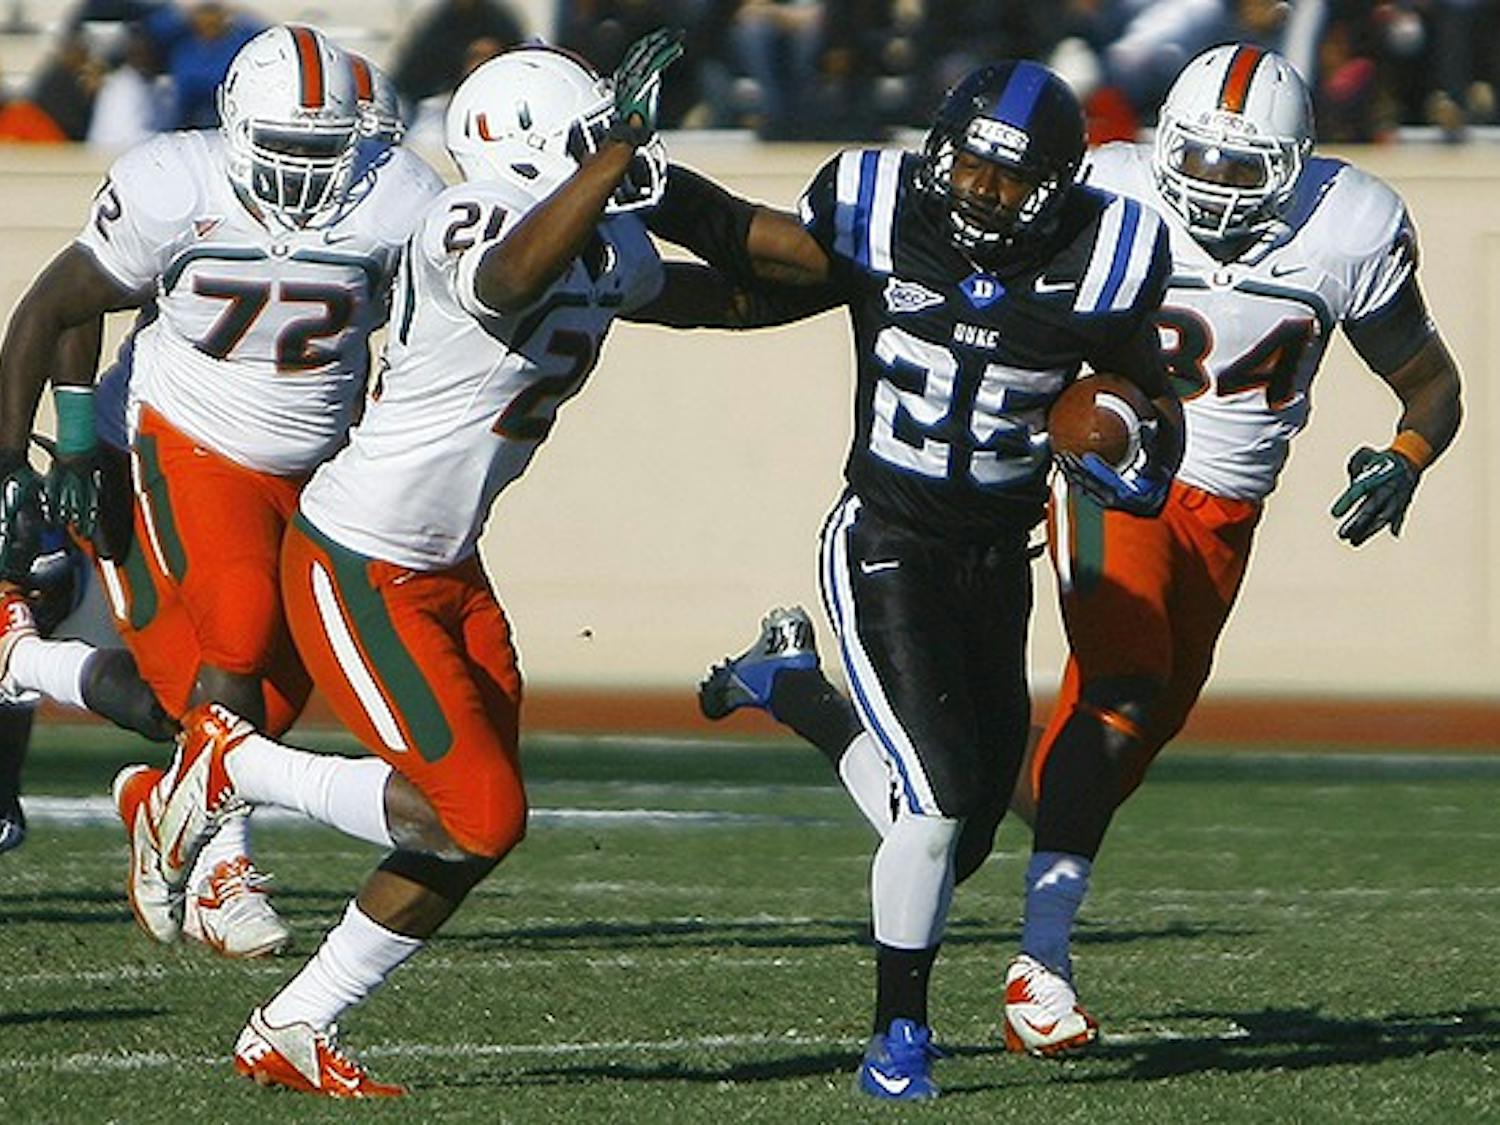 Duke's football team fell to Miami 52-45 in their regular season finale earlier today in Wallace Wade Stadium. Quarterback Sean Renfree threw for four touchdowns in the loss.